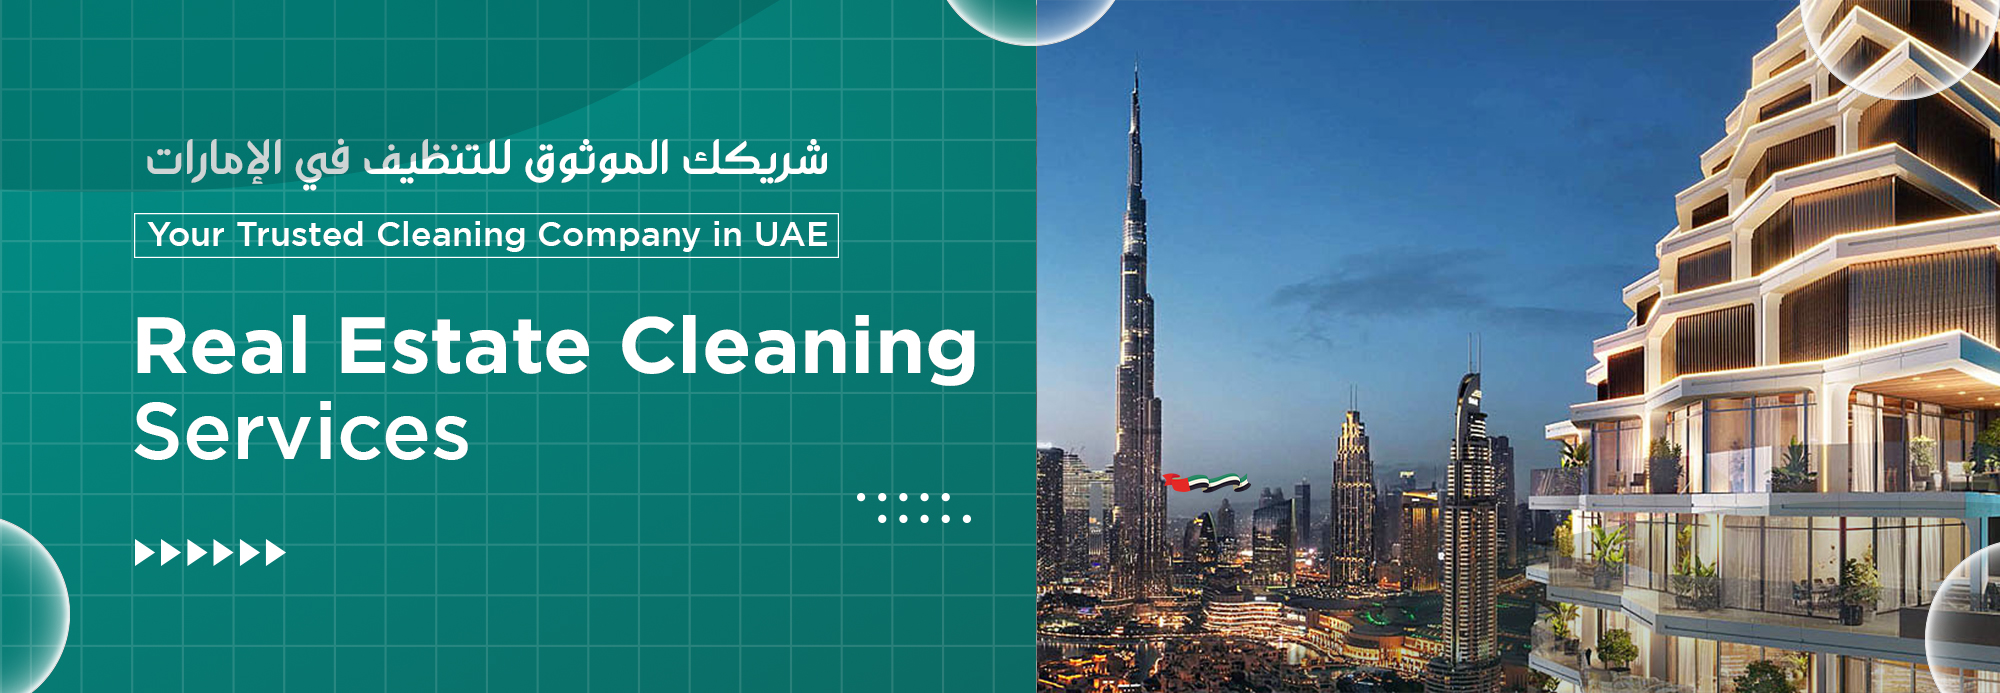 real estate cleaning service dubai